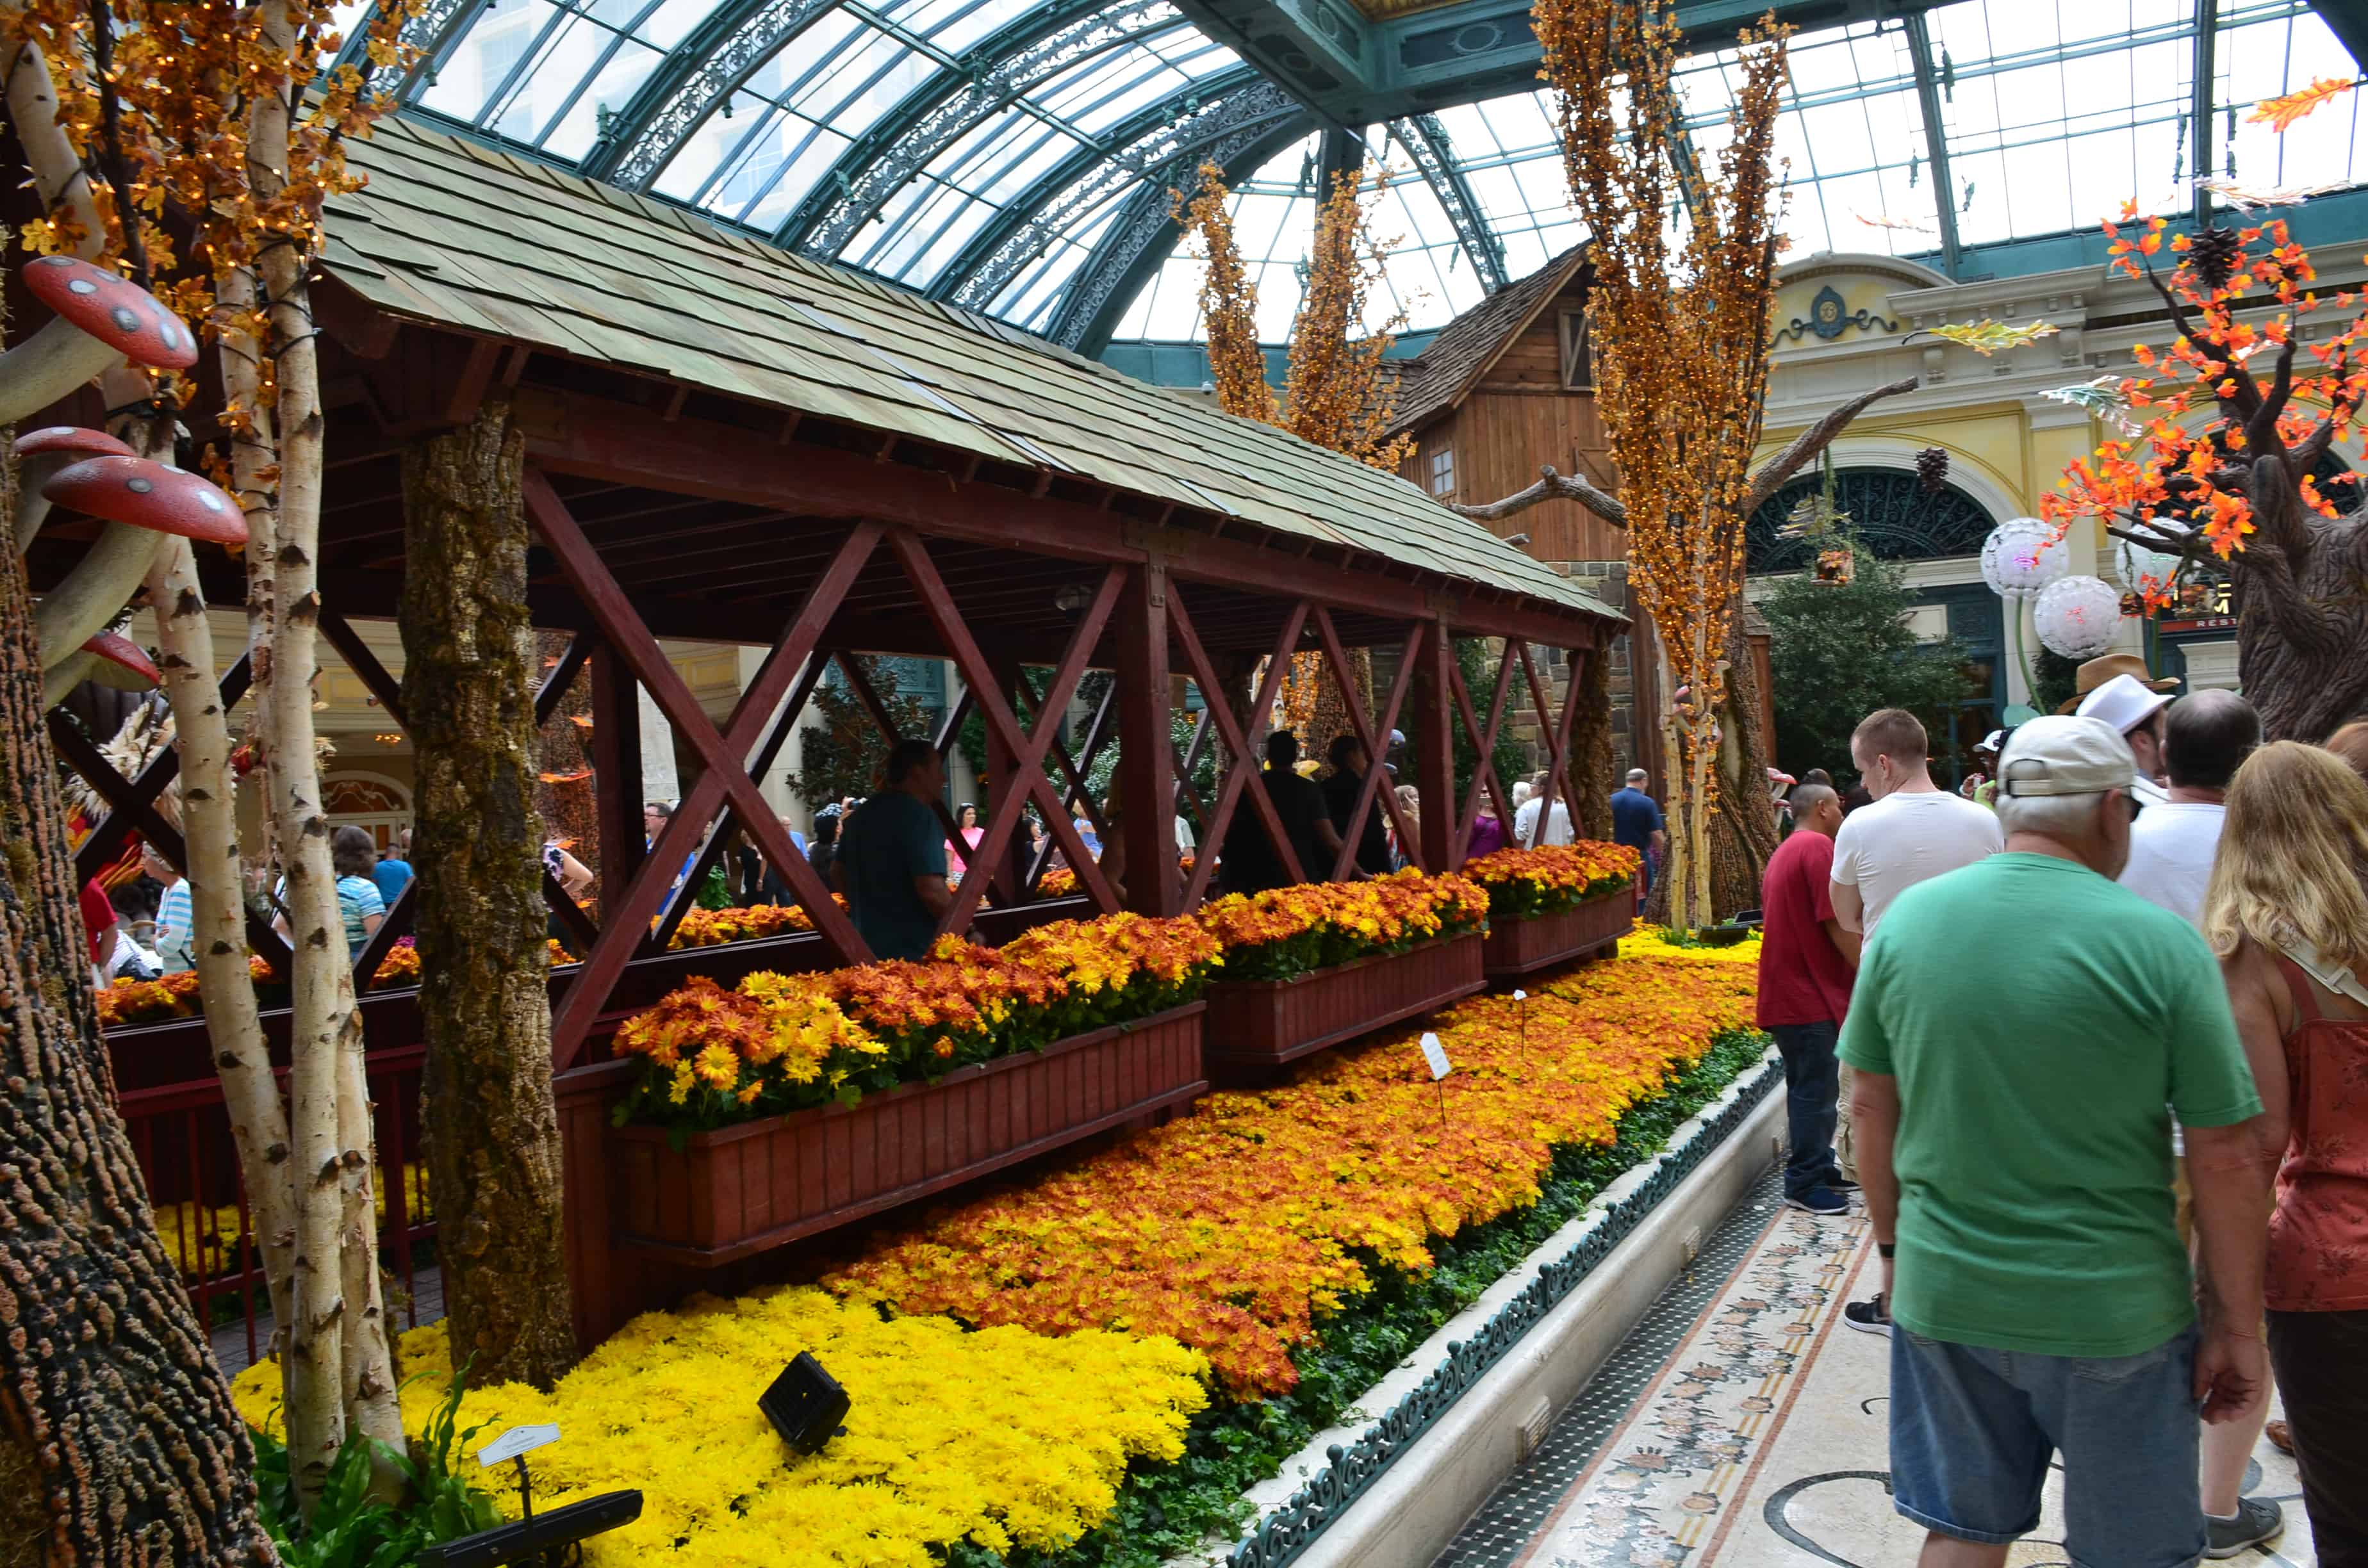 Conservatory and Botanical Gardens at the Bellagio in Las Vegas, Nevada